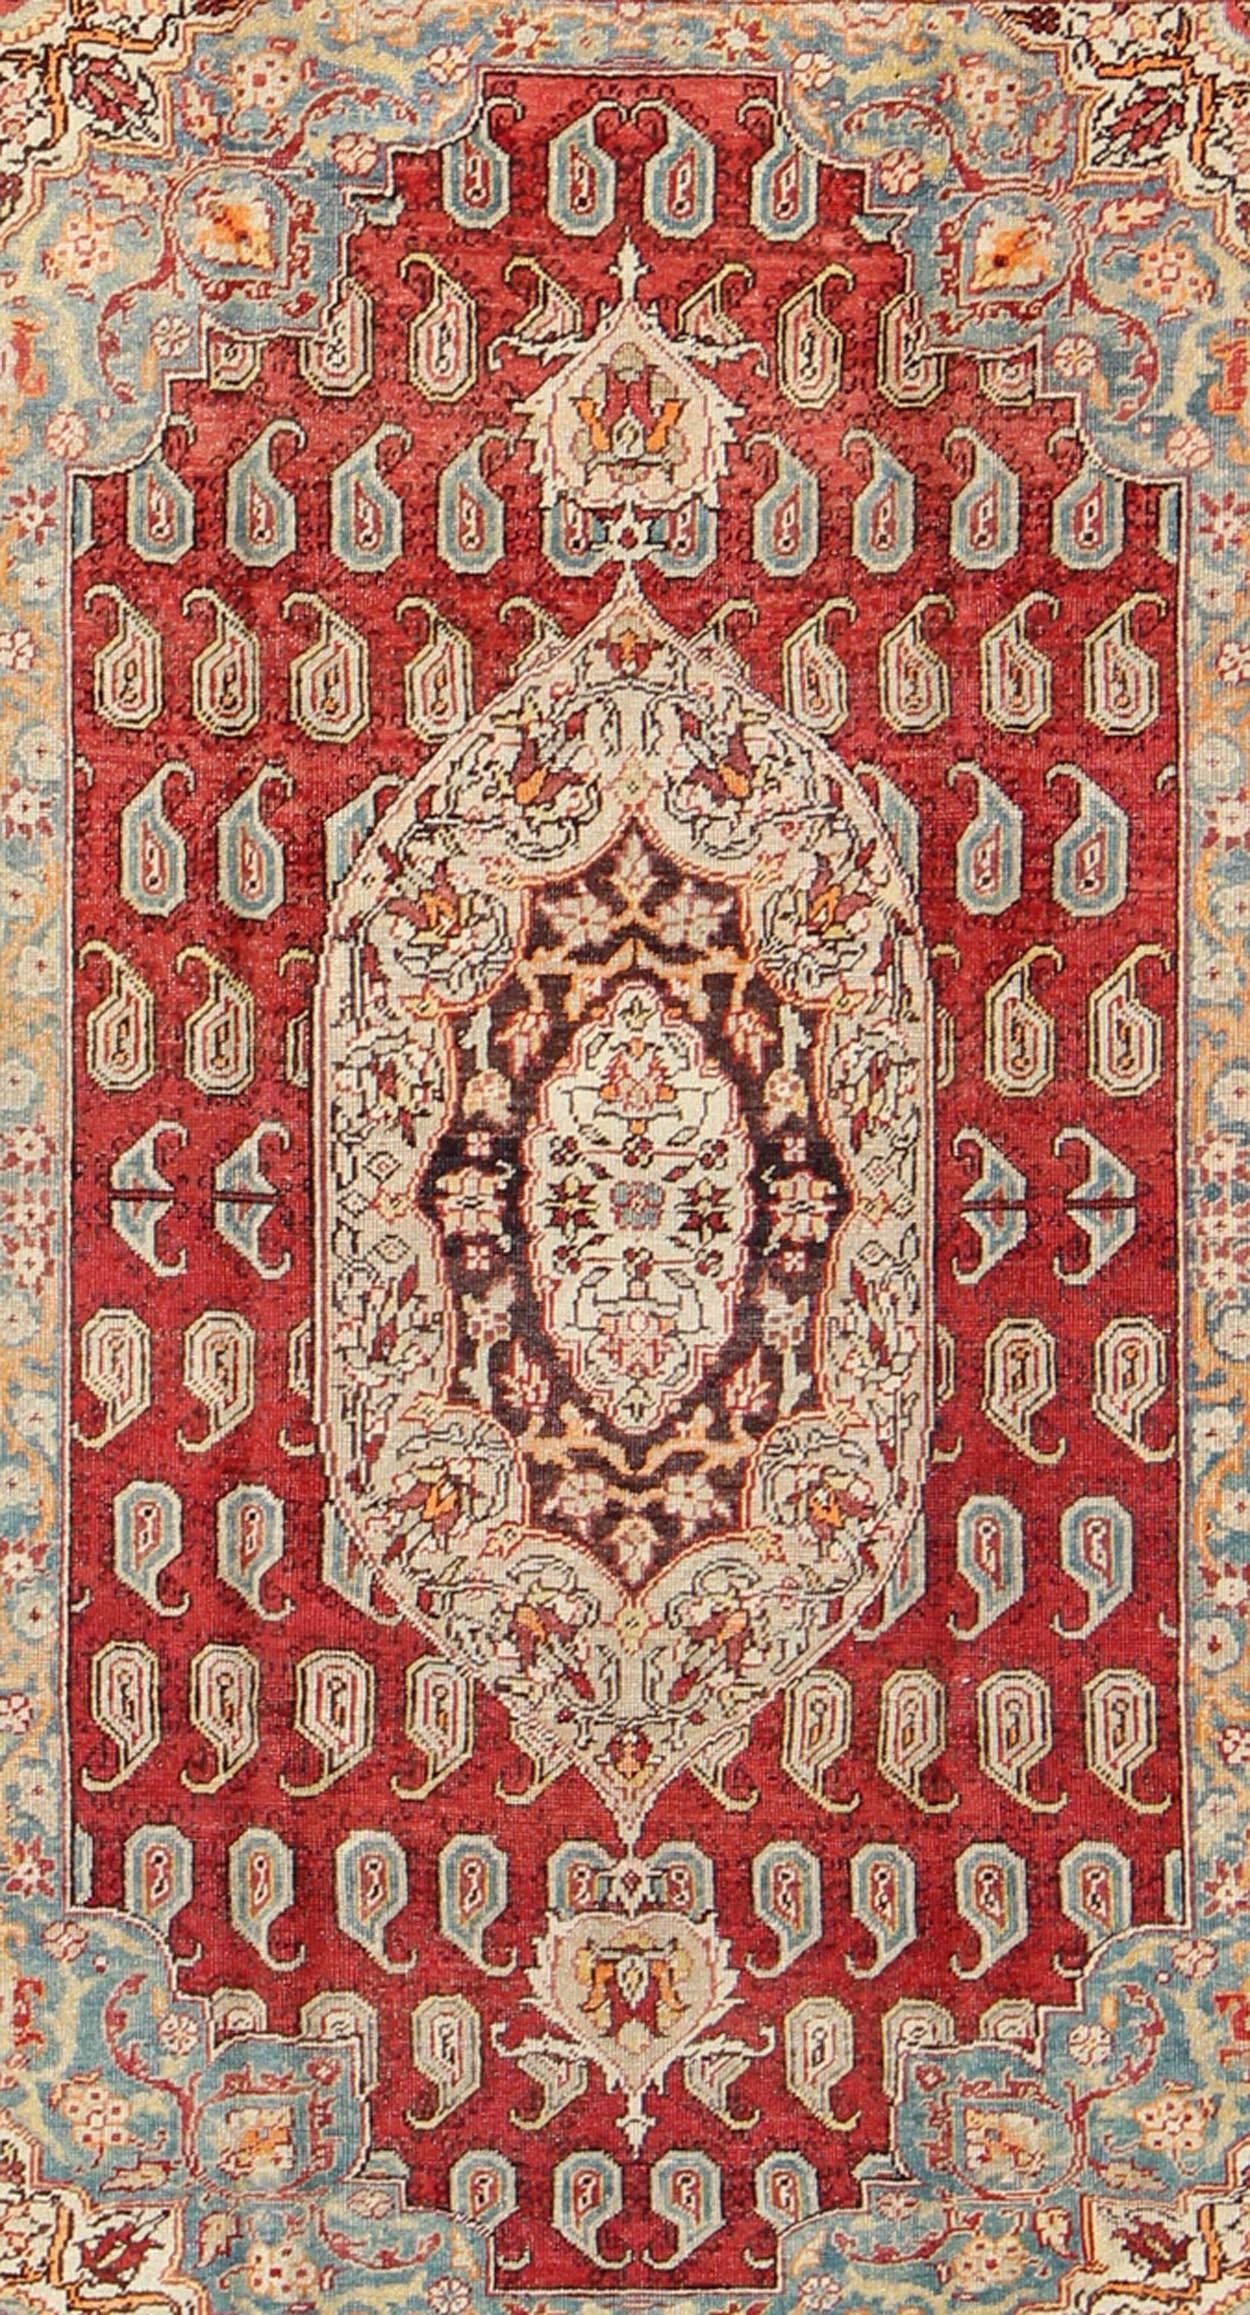 Antique Turkish Oushak Rug with Paisley Design in Red, Brown and Blue In Good Condition For Sale In Atlanta, GA